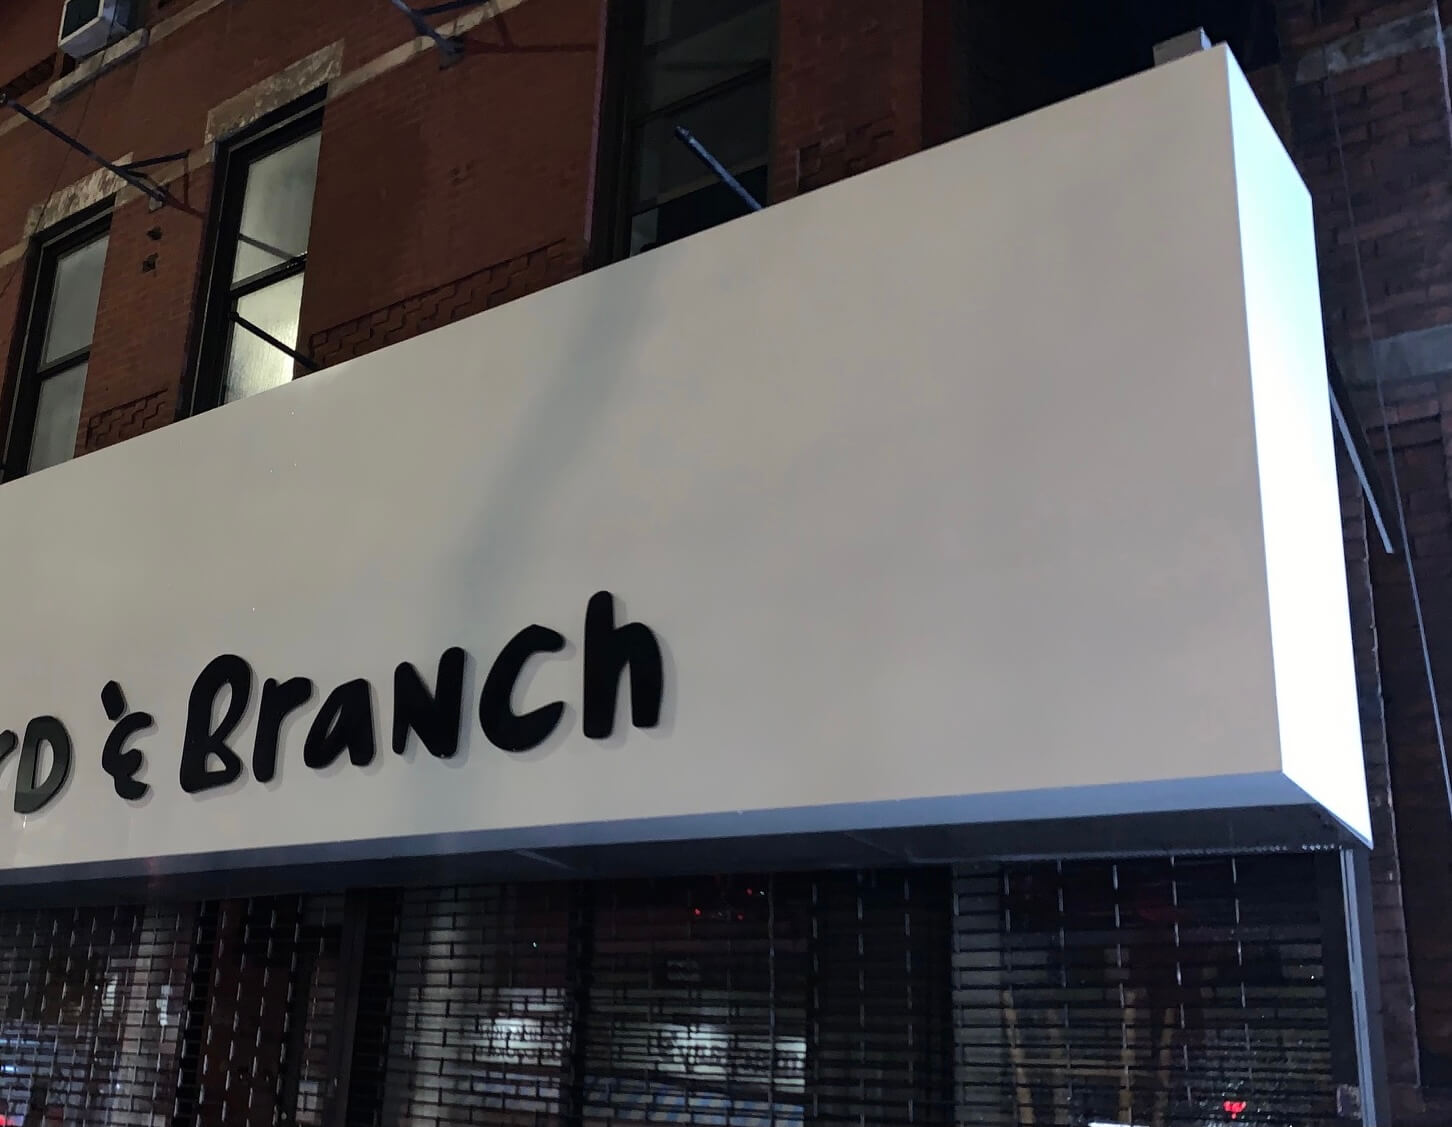 Bird-And-Branch-Sign-Cleaning-Storefront-Maintenance-NYC (1) copy